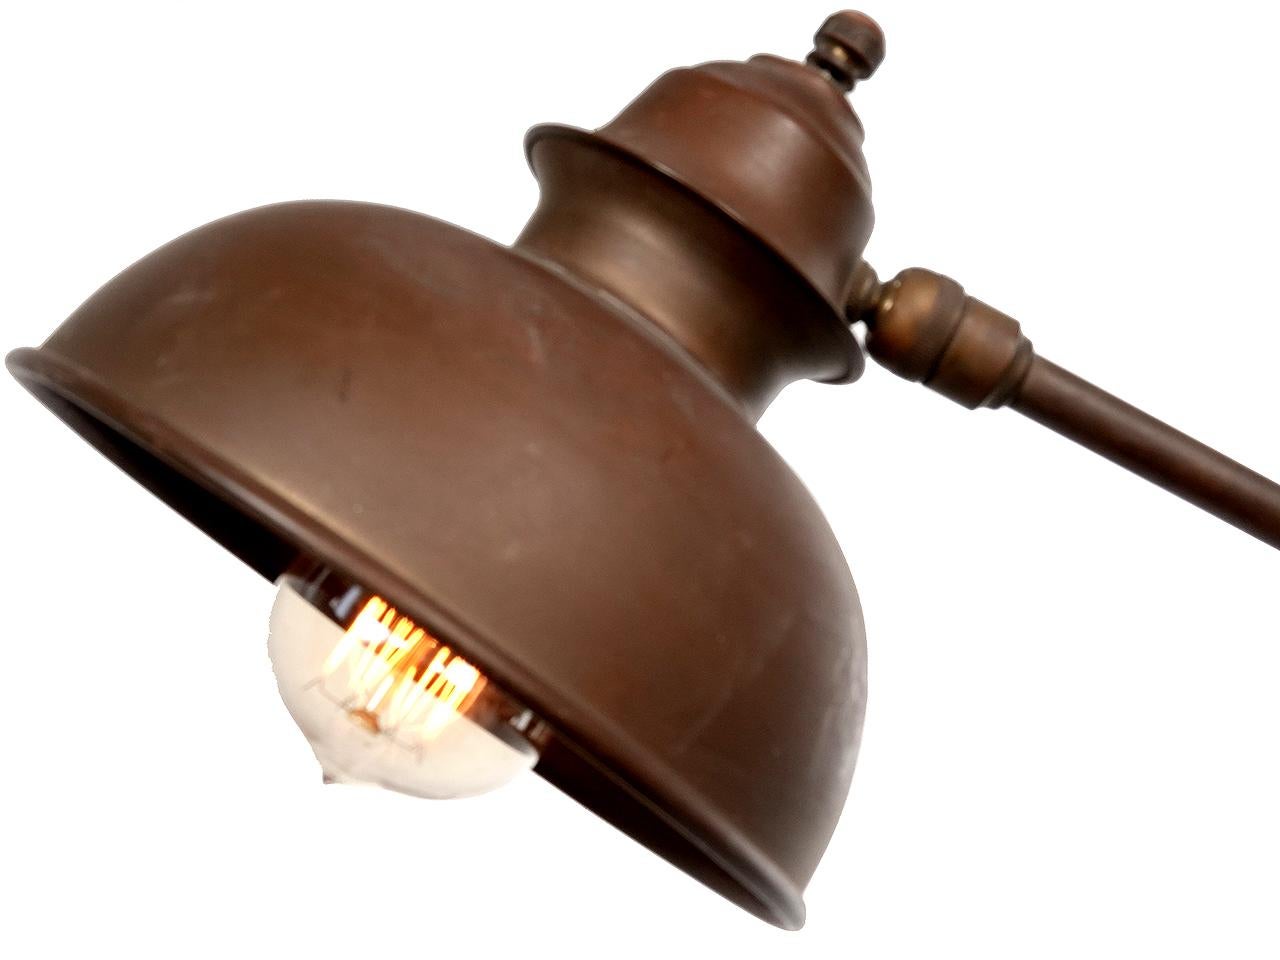 This articulating lamp too nice to have been a workshop lamp. It may have been used in a doctors office or as library reading lamp. The look is delicate and well balanced. It comes with a long twisted fabric covered cord and plug. The finish is